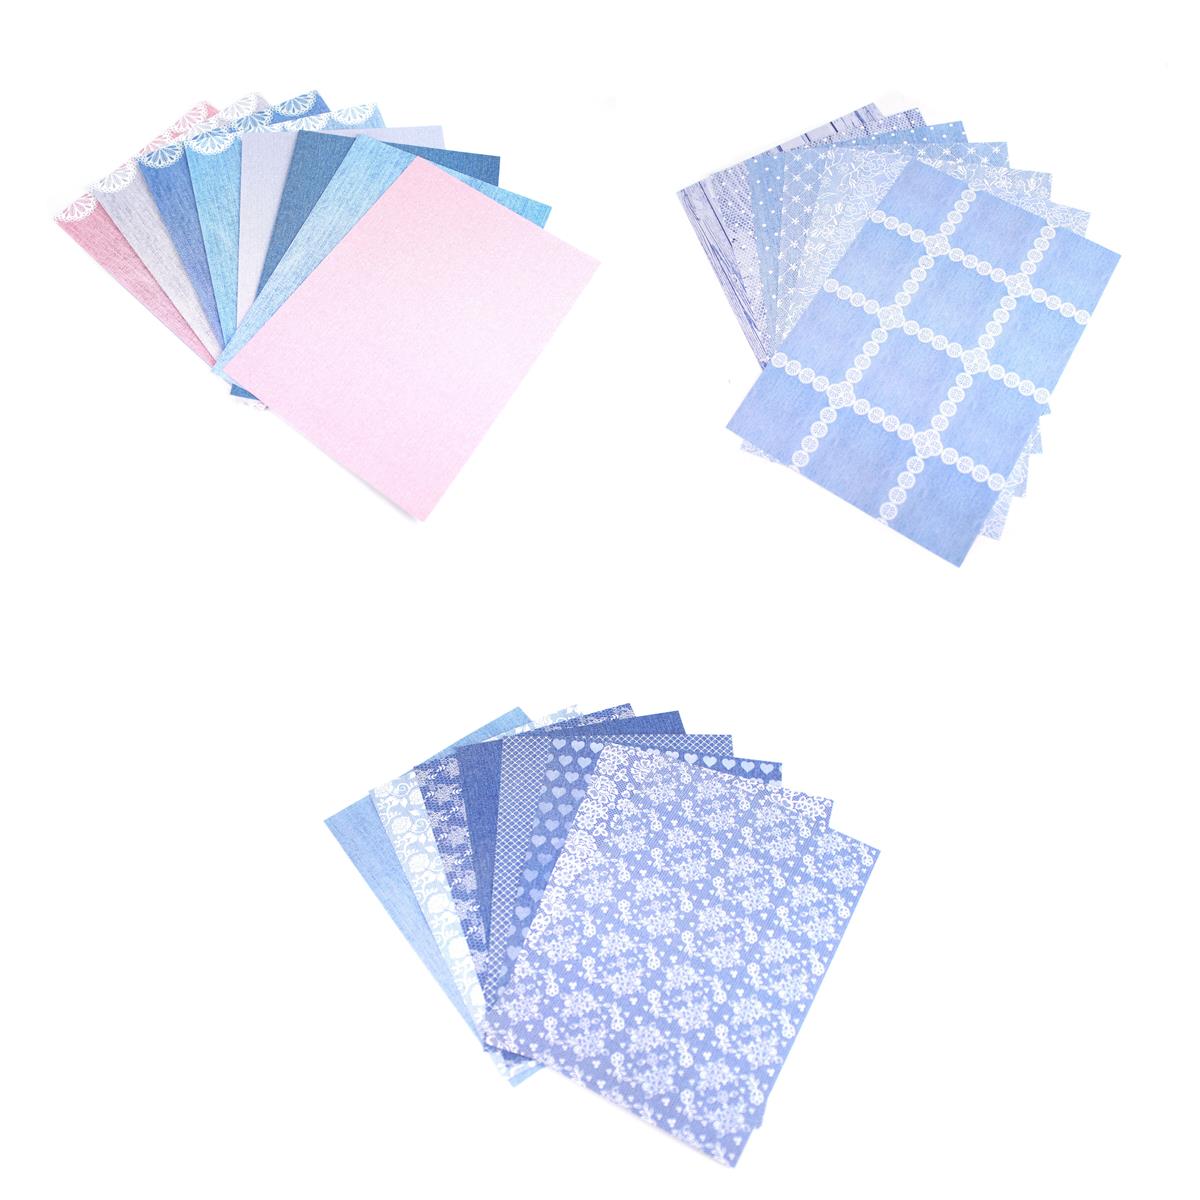 Paper Dienamics - The Denim And Lace papercraft collection - 3 ranges ...